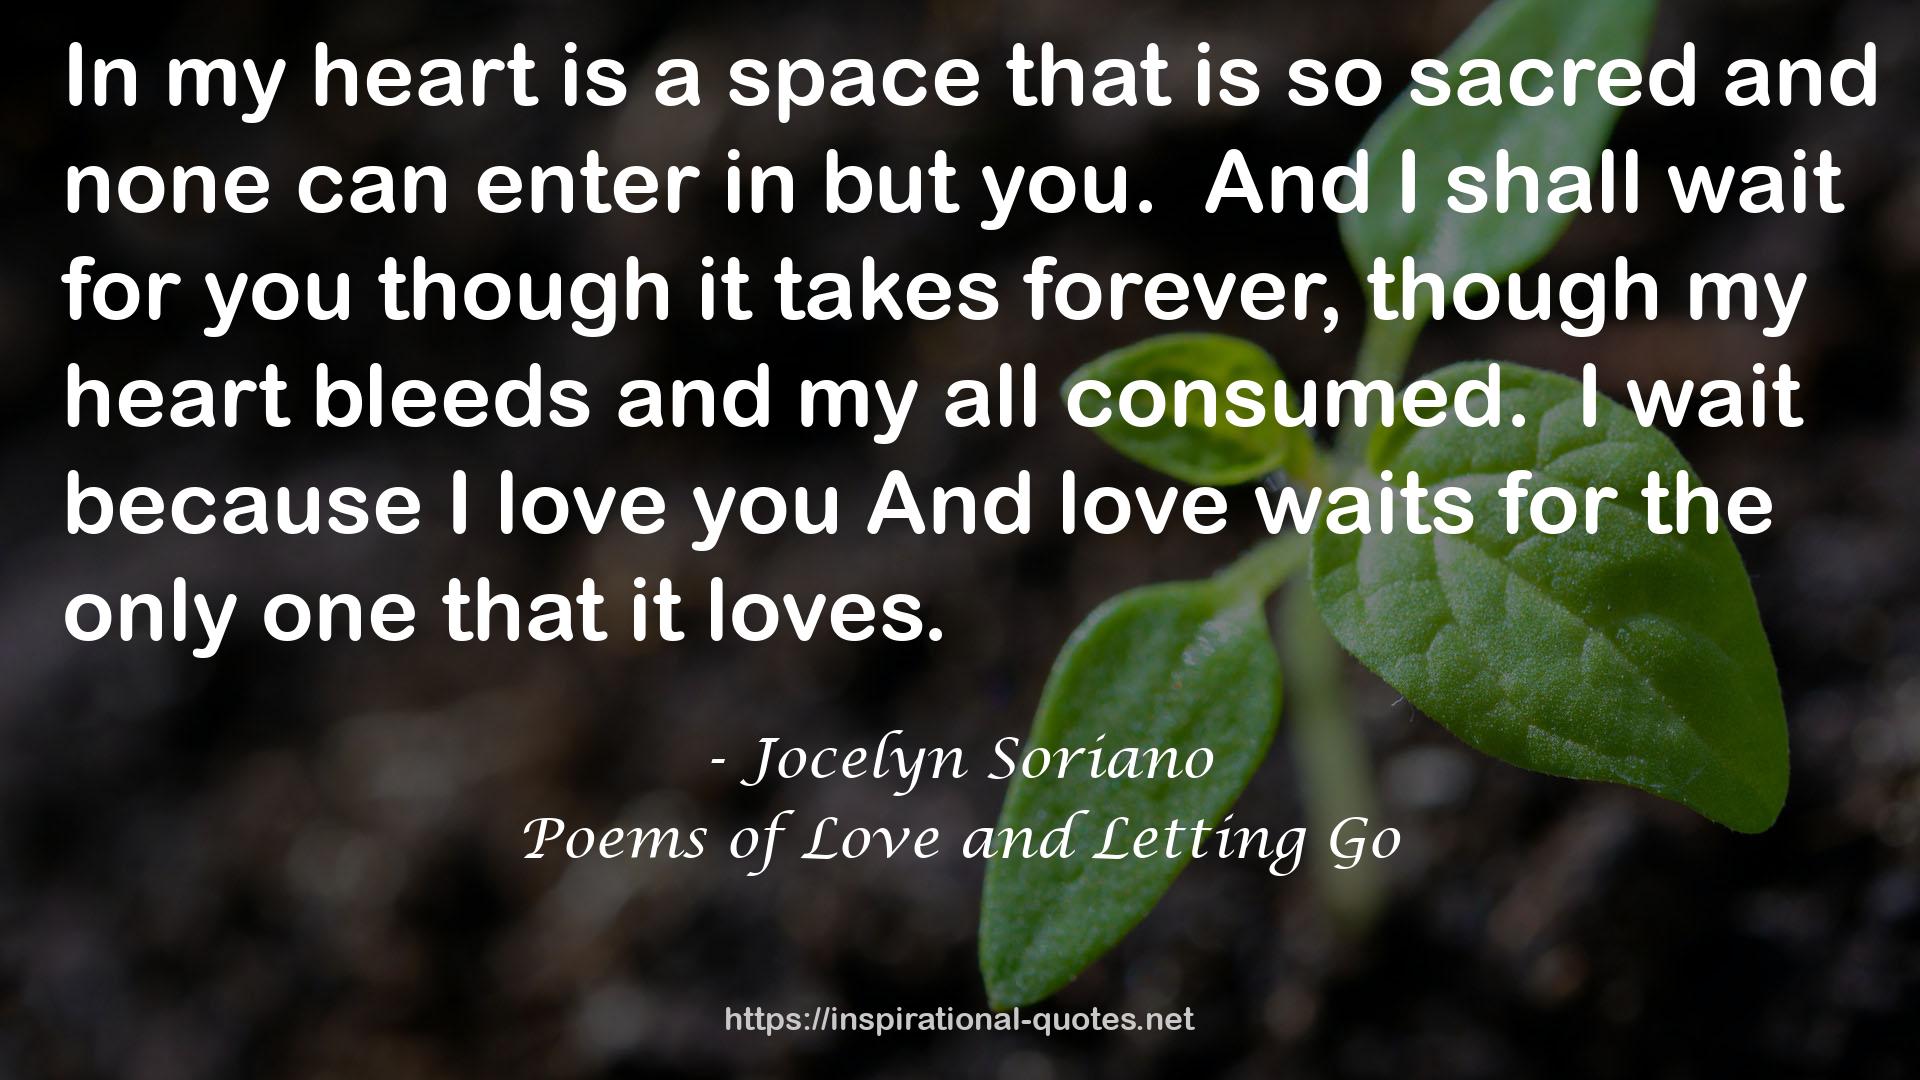 Poems of Love and Letting Go QUOTES